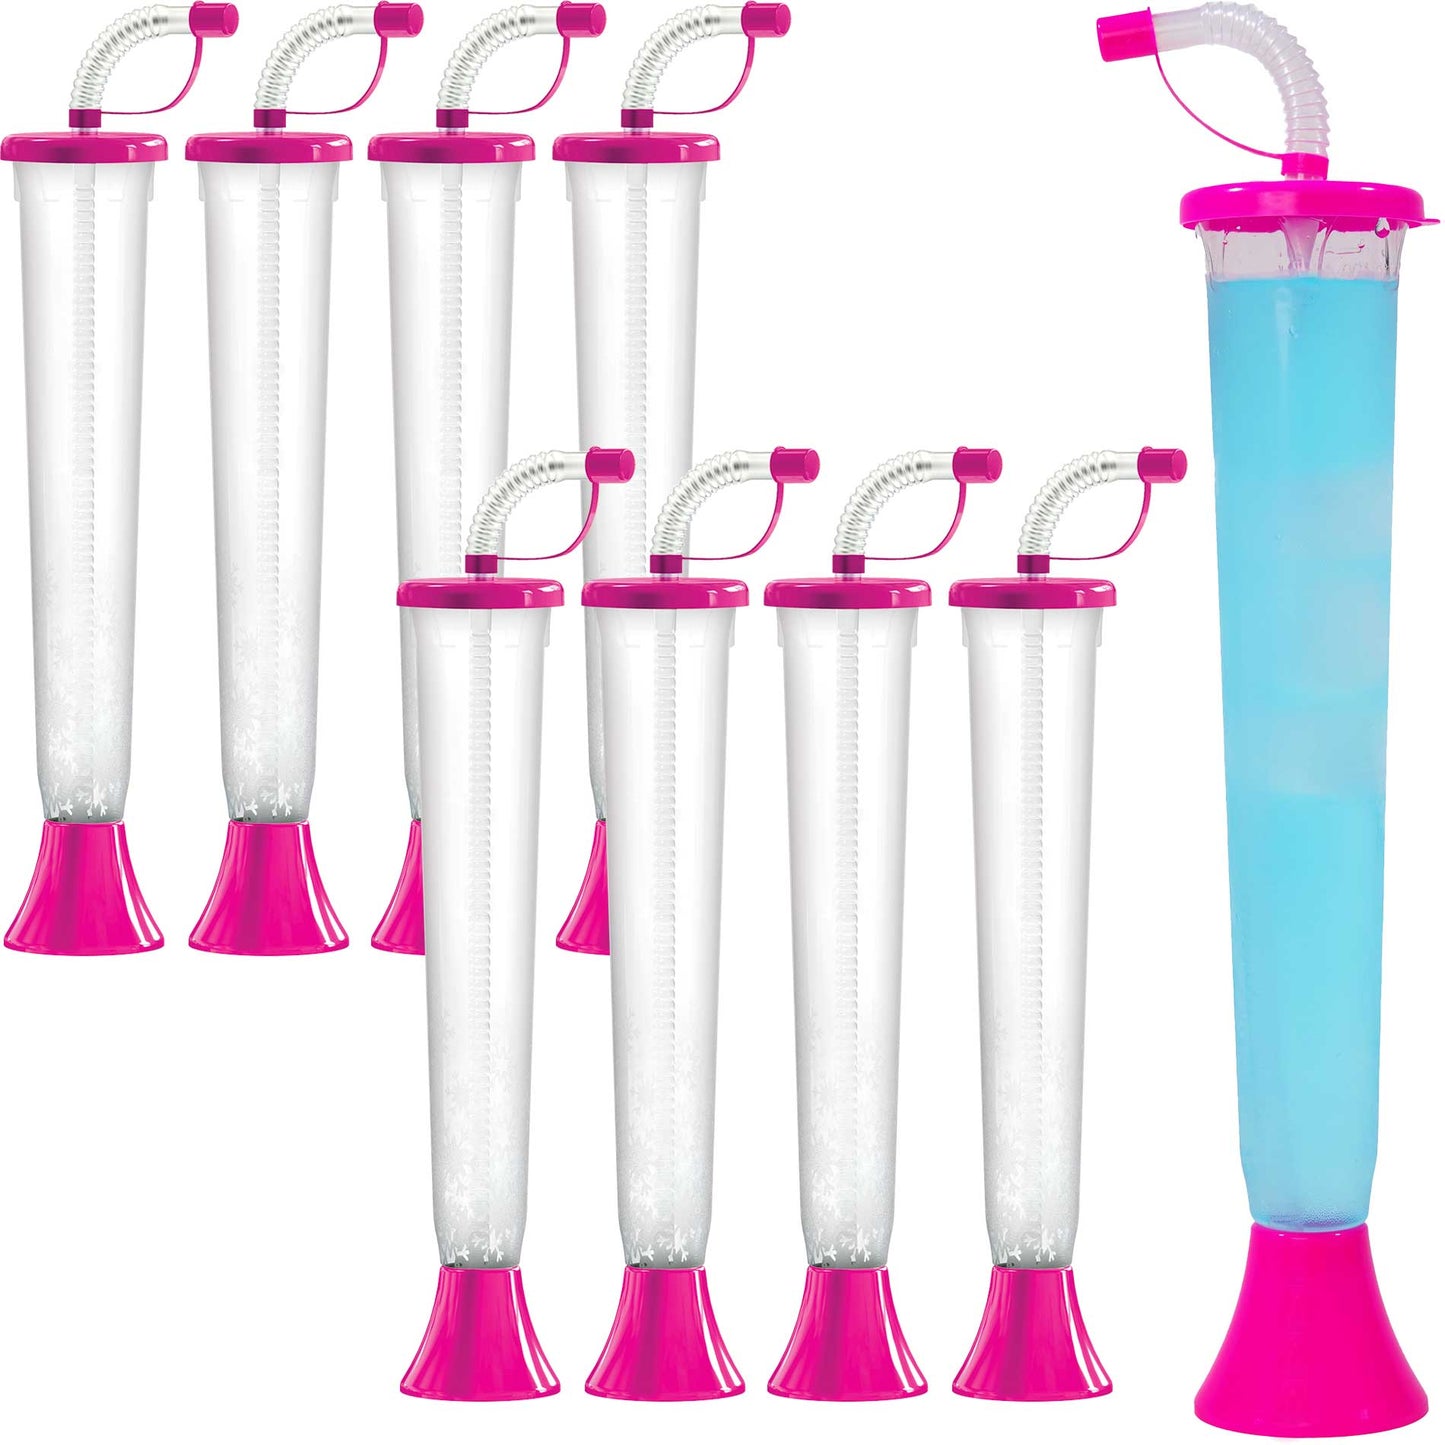 https://noveltycupsusa.com/cdn/shop/files/sweet-world-usa-yard-cups-54-or-108-cups-yard-cups-with-pink-lids-and-straws-14oz-for-margaritas-and-frozen-drinks-cups-with-lids-and-straws-35523714482335.jpg?v=1684775681&width=1445